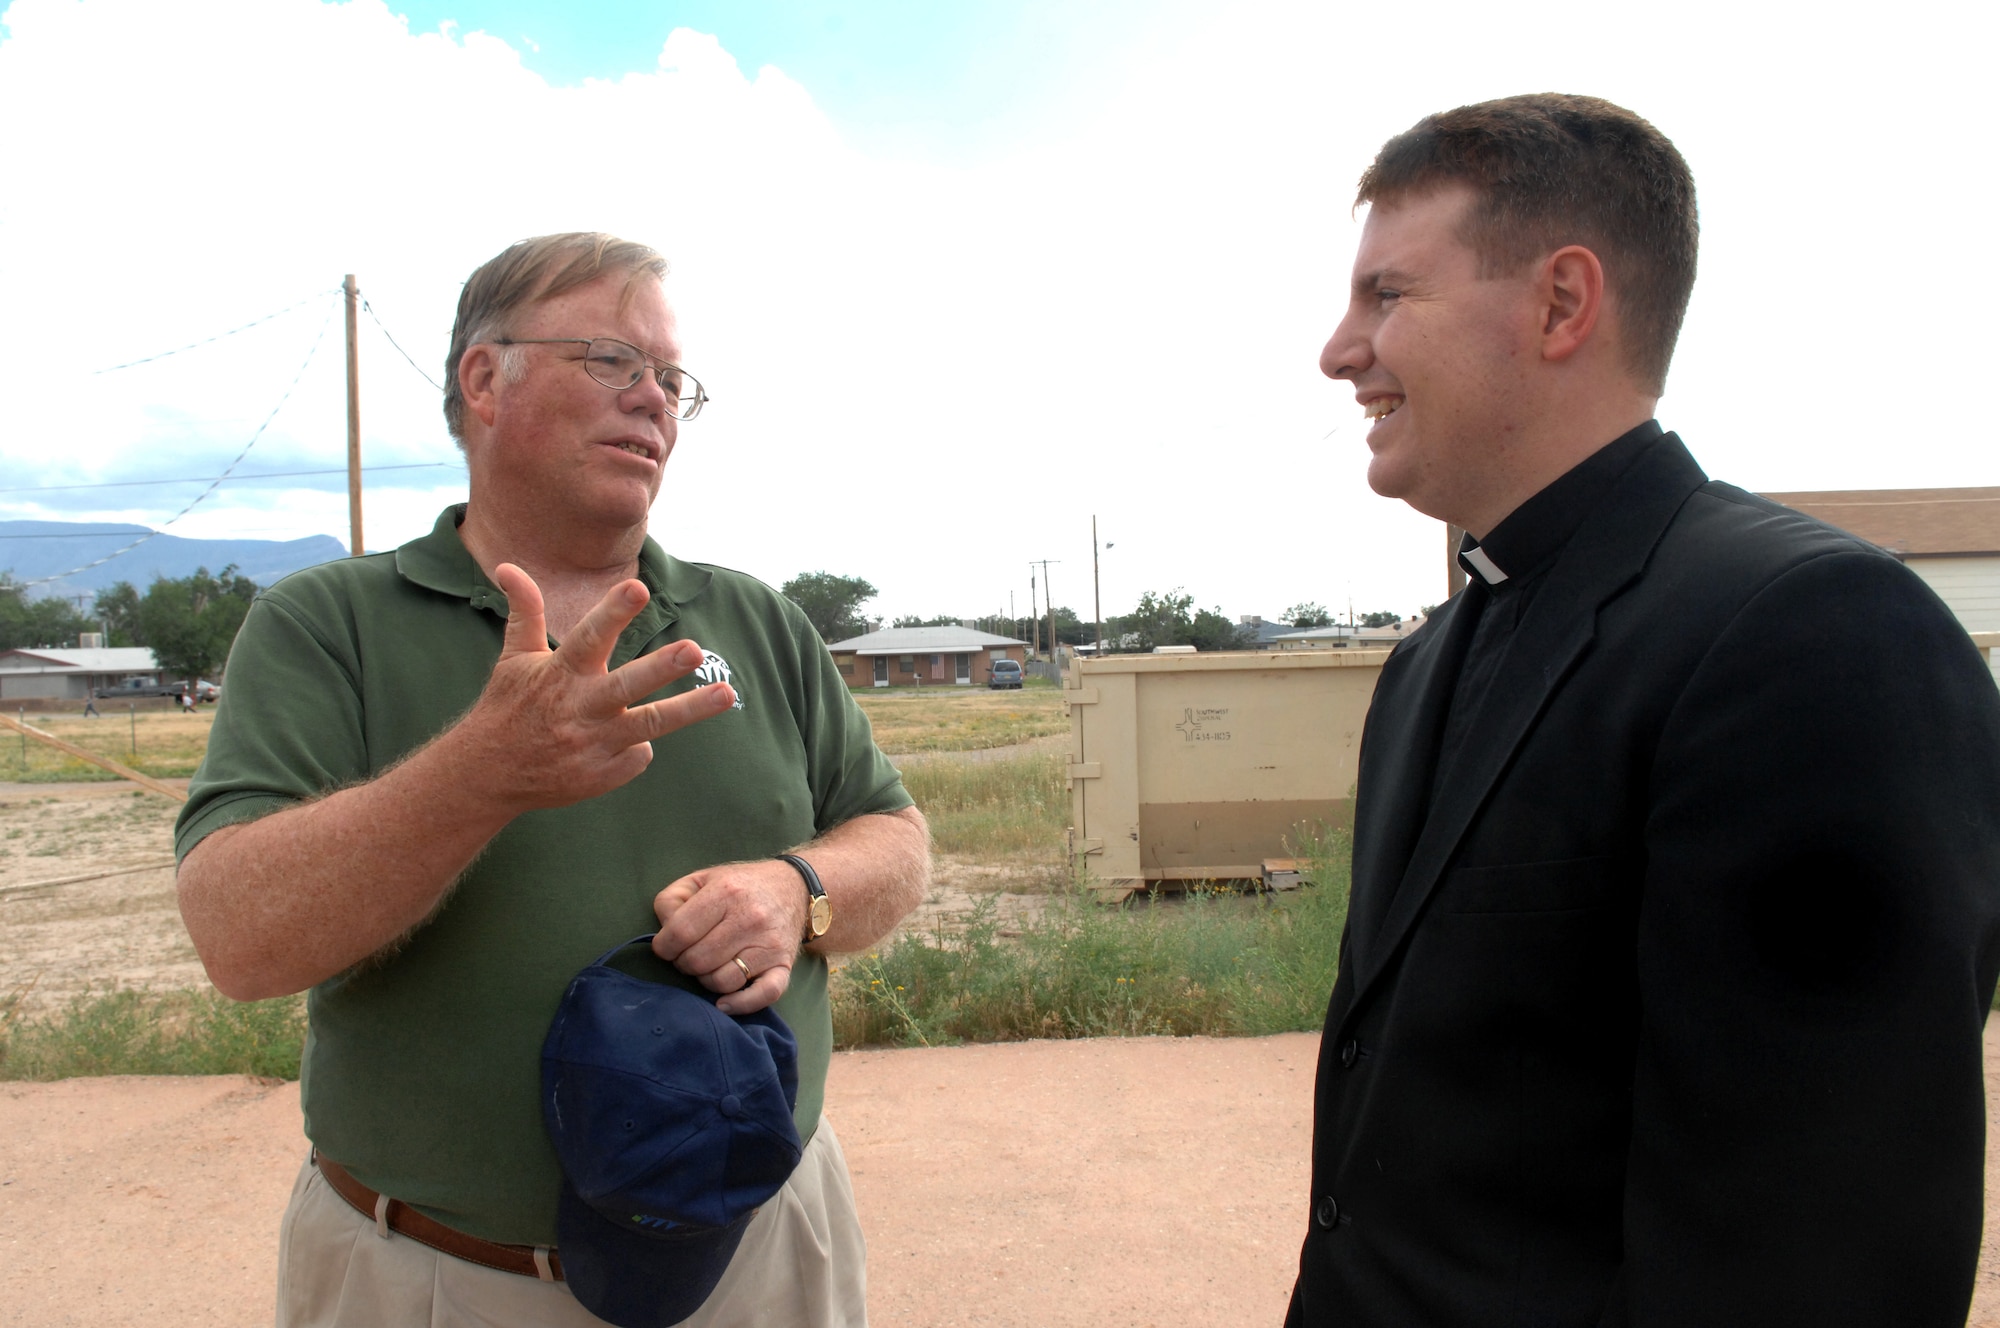 Mr. Norman Daviess, board president of the Otero County Habitat for Humanity organization, speaks with Chaplain Matthew Glaros during the groundbreaking ceremony in Alamogordo, N.M., October 12. Mr. Daviess explains how families with financial difficulty have the opportunity to build a house with the help of Habitat for Humanity volunteers. (U.S. Air Force photo/Airman Veronica Salgado)